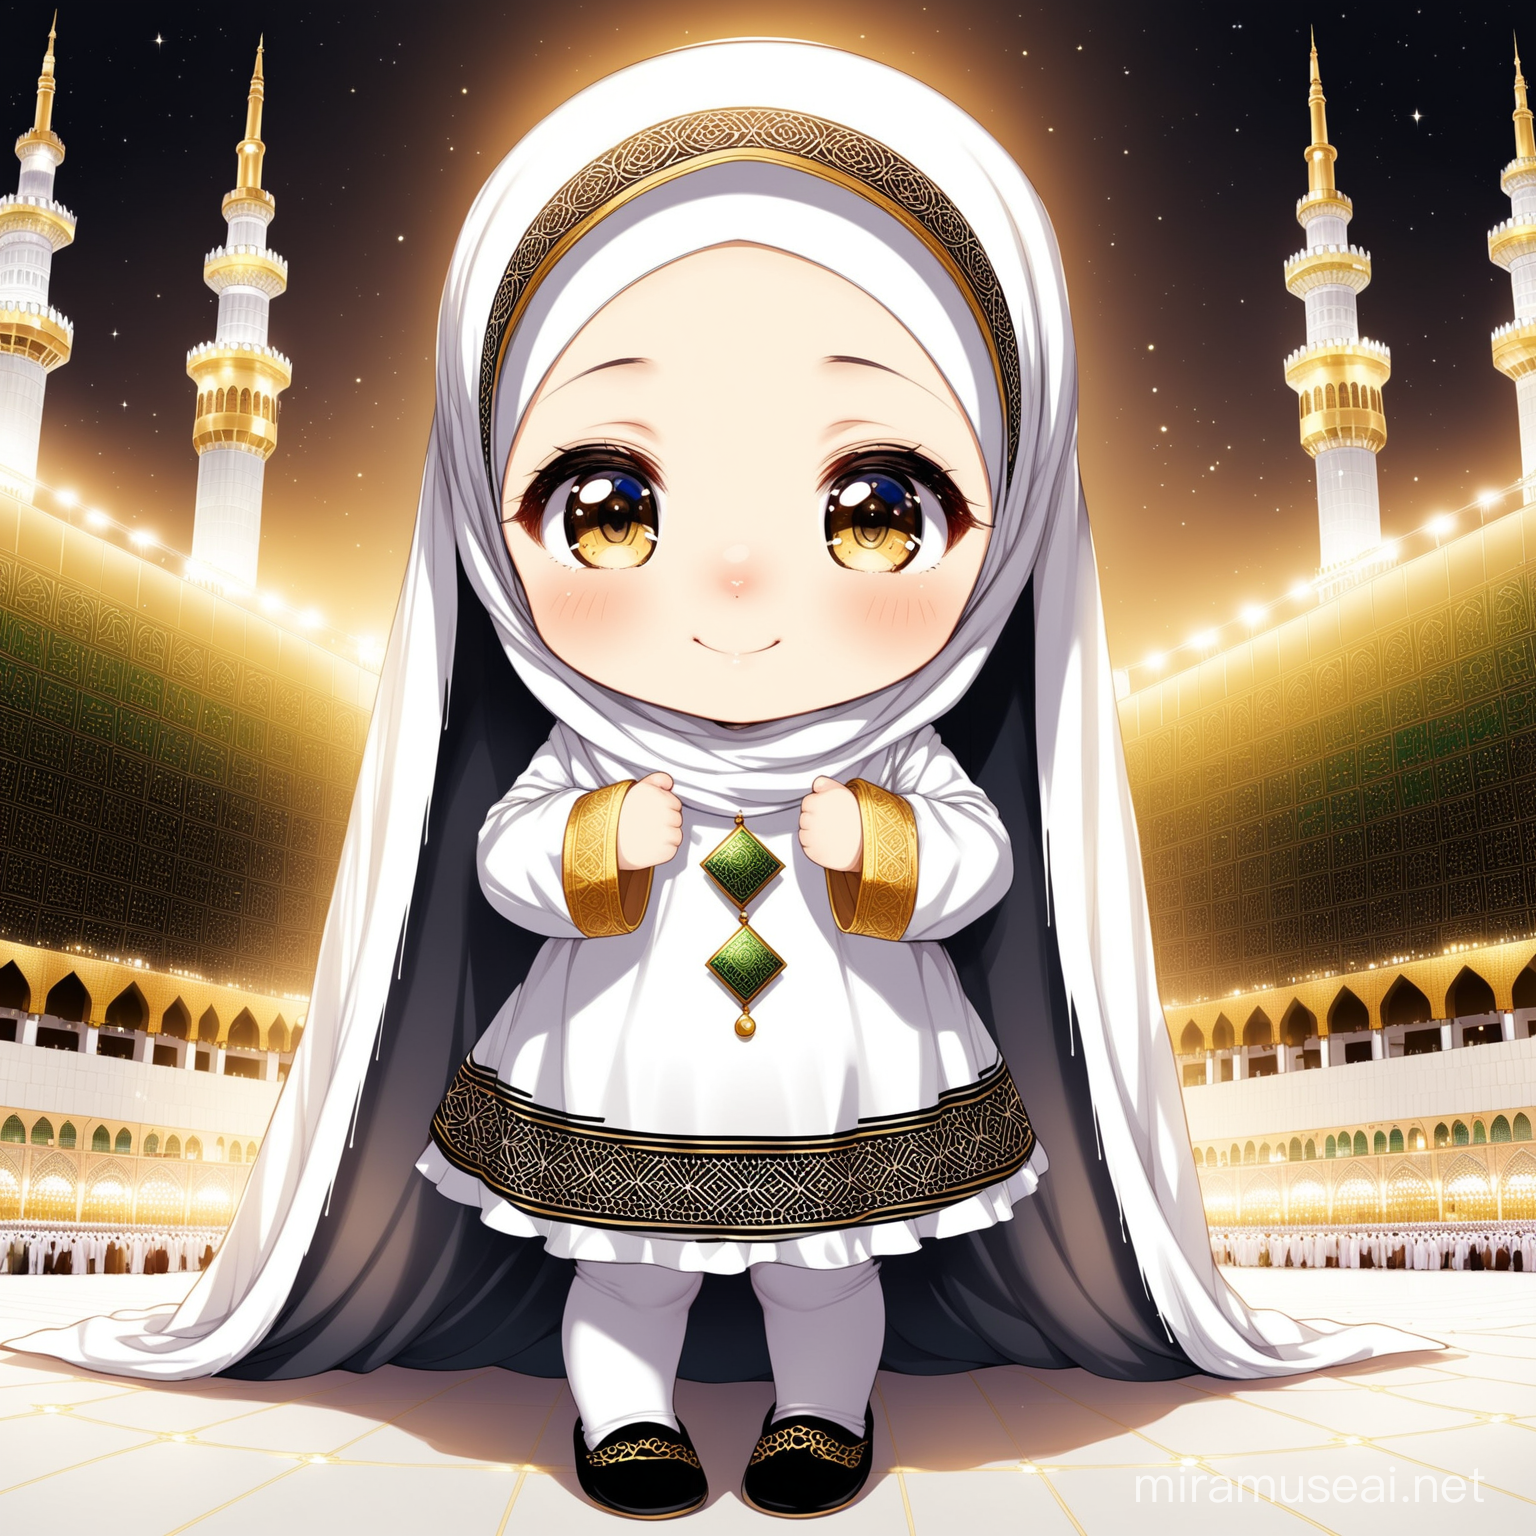 Character Persian little girl(full height, Muslim, with emphasis no hair out of veil(Hijab), smaller eyes, bigger nose, white skin, cute, smiling, wearing socks, clothes full of Persian designs) with both father(not Arab) and mother.

Atmosphere Kaaba cube in Mecca, nobody.